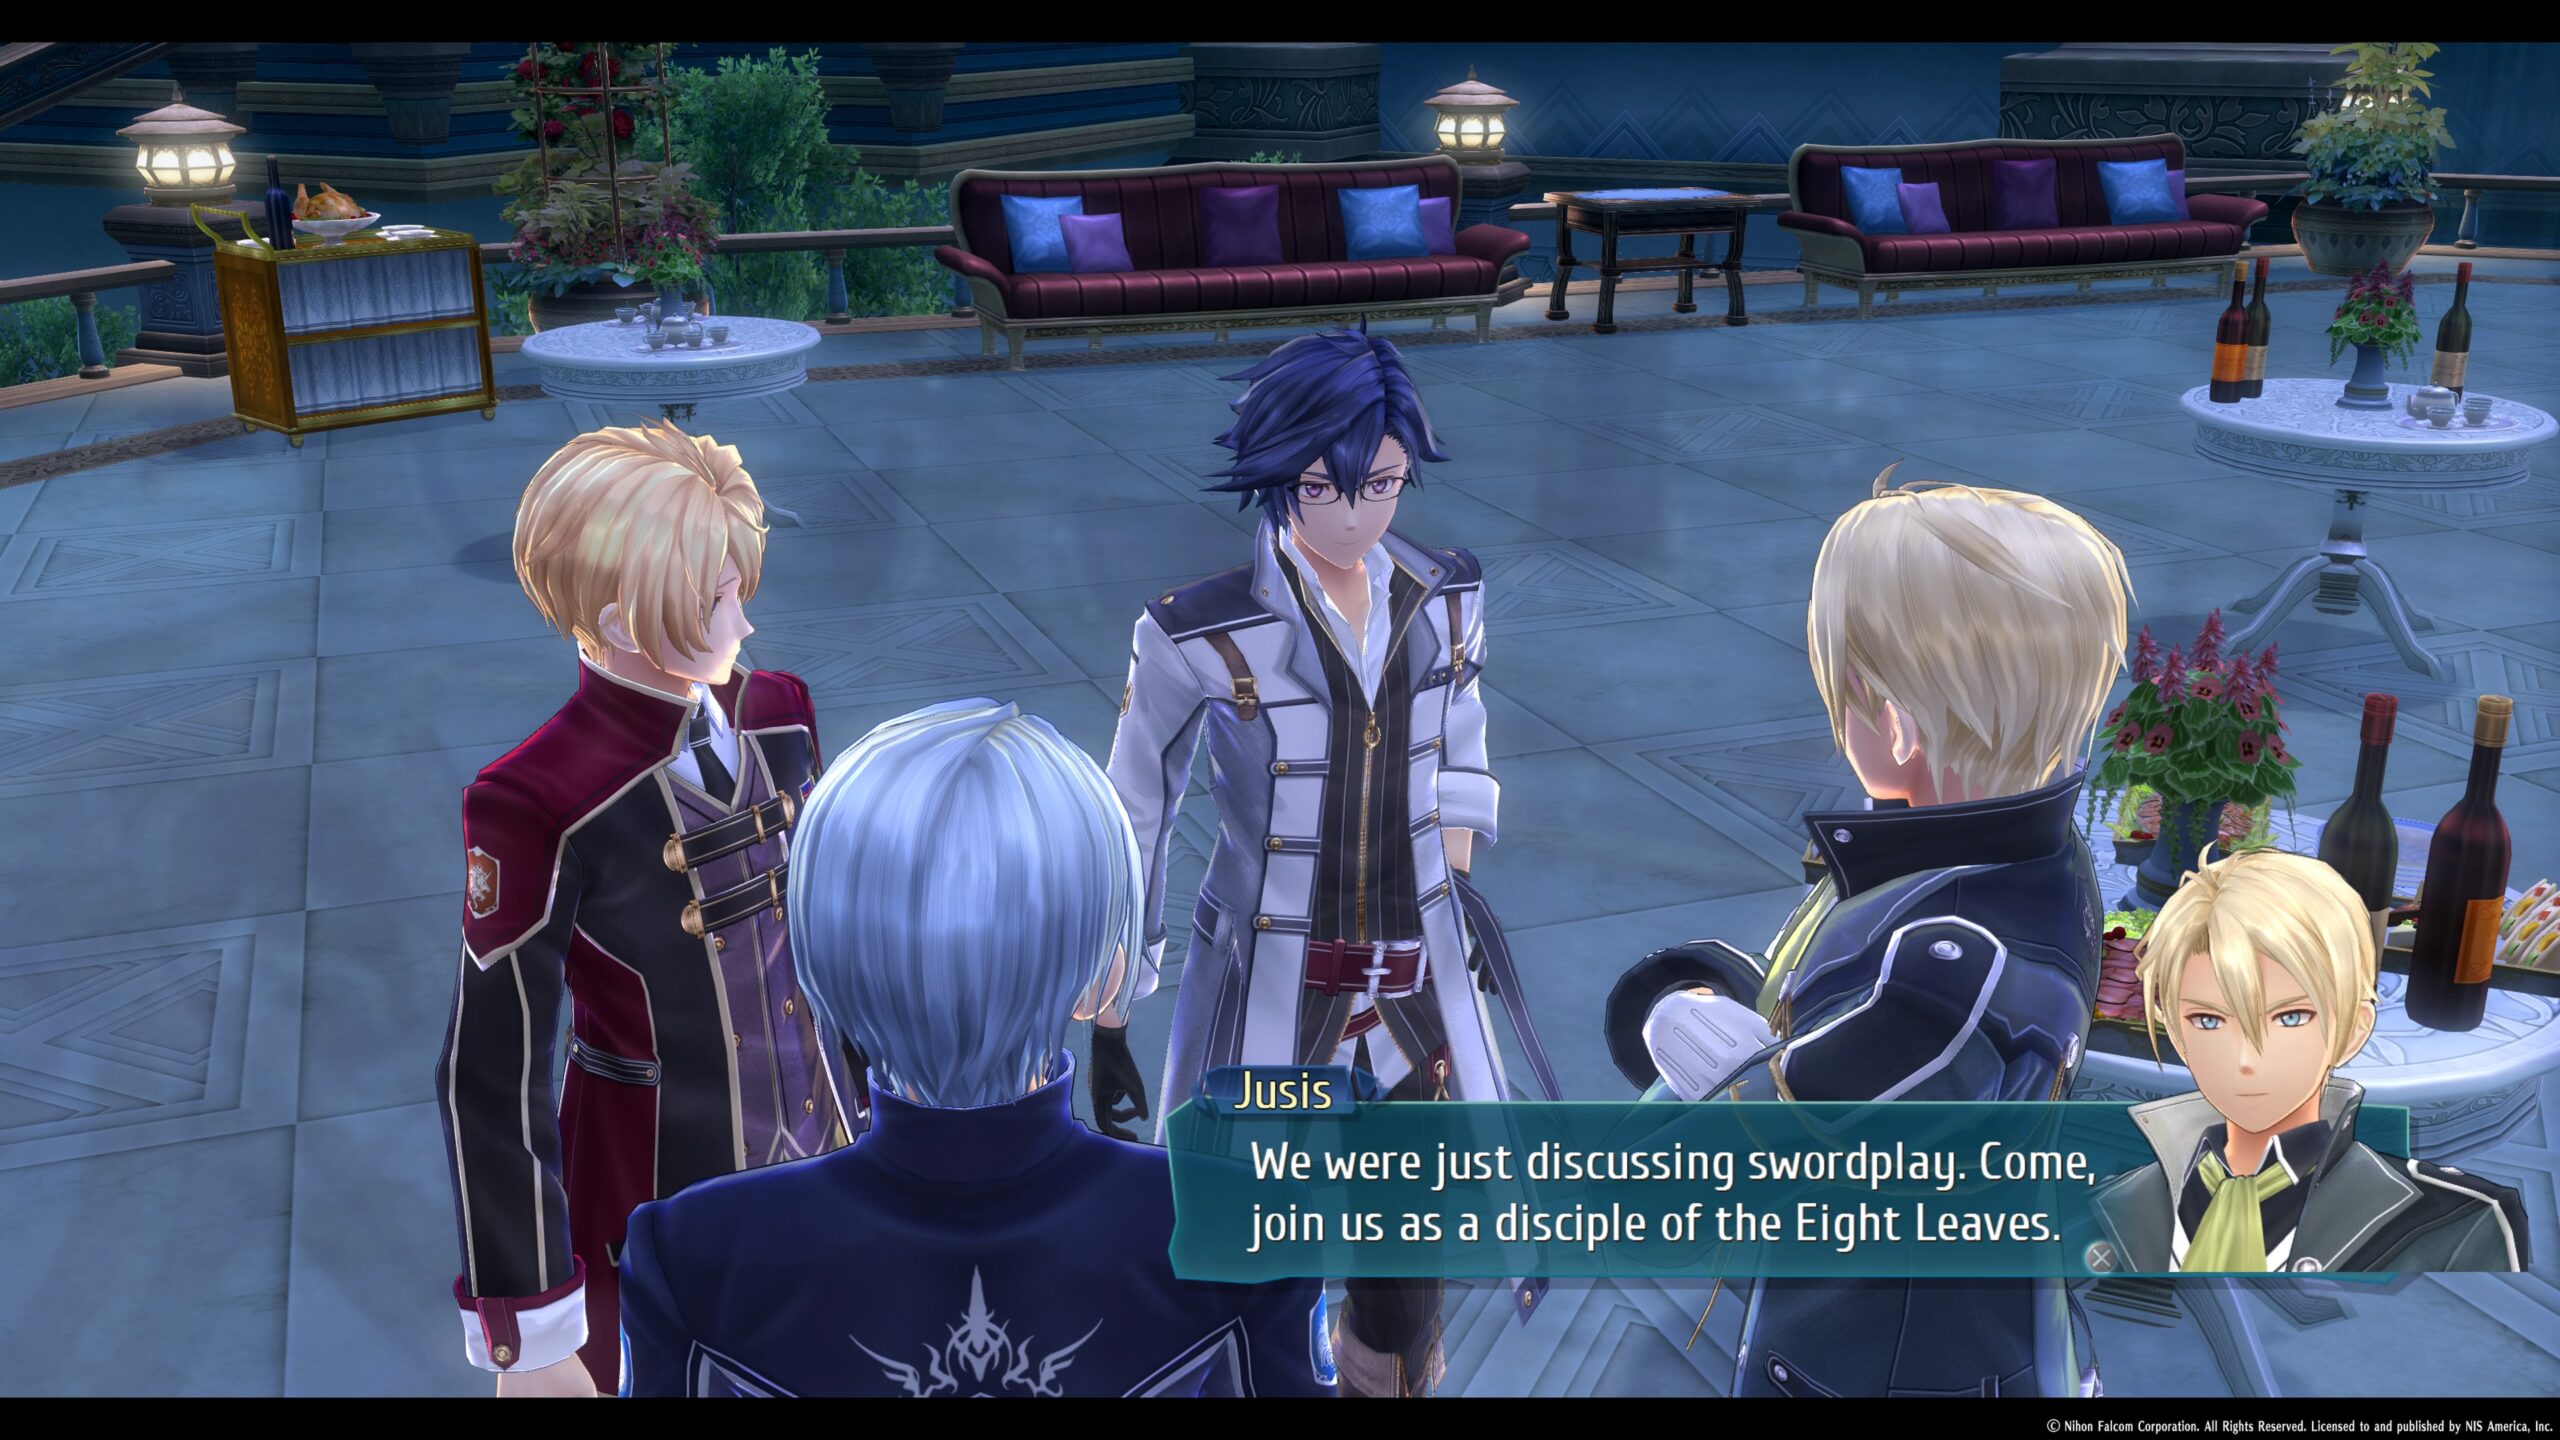 Cutscene from The Legend of Heroes: Trails of Cold Steel III